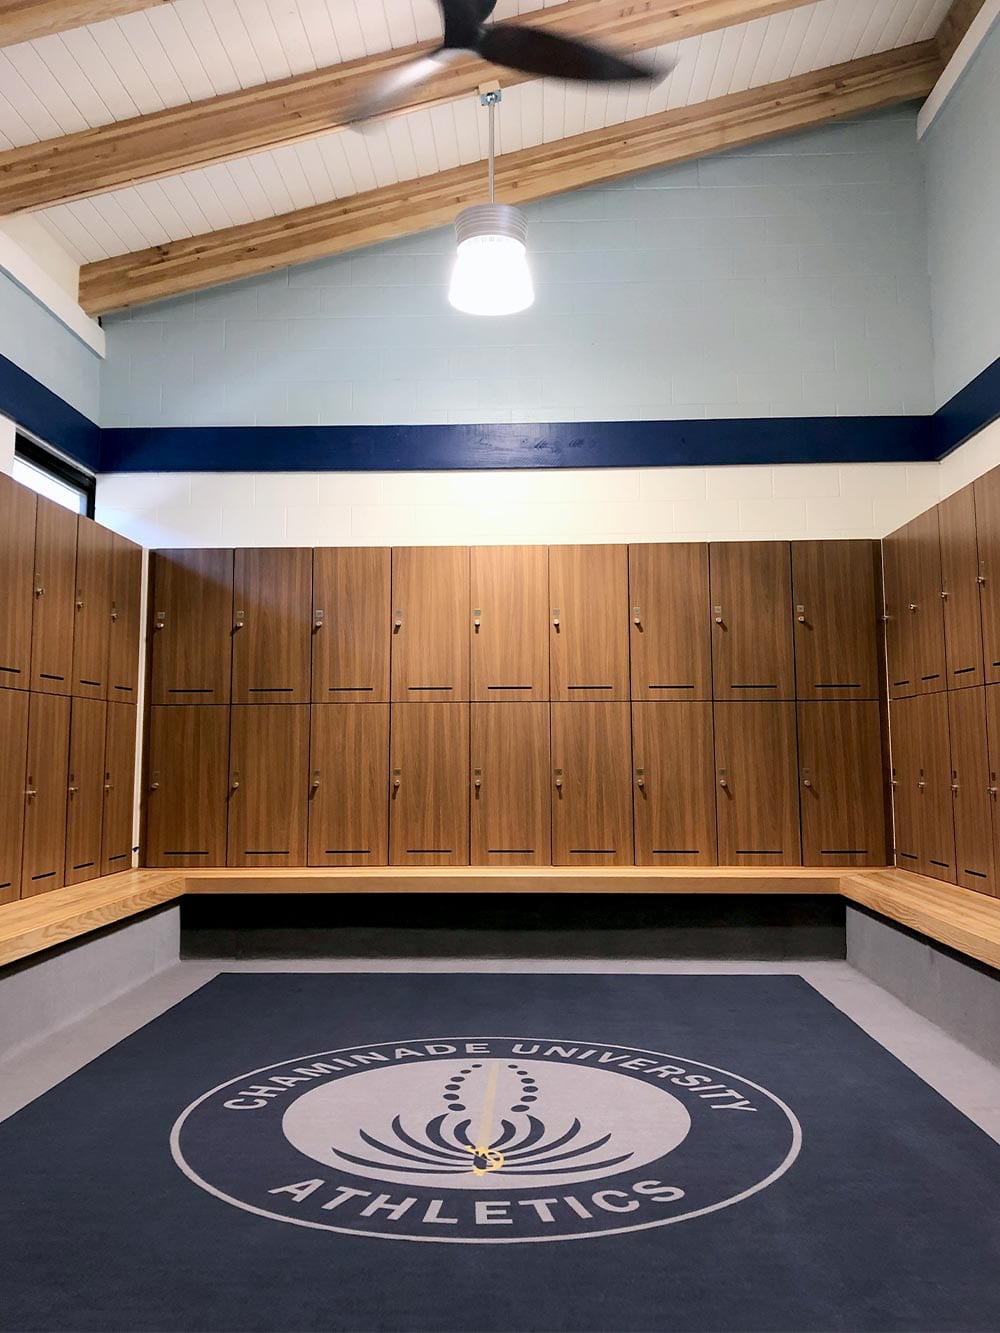 Room surrounded by phenolic lockers with Integrated Bench and blue rug with Chaminade University logo.